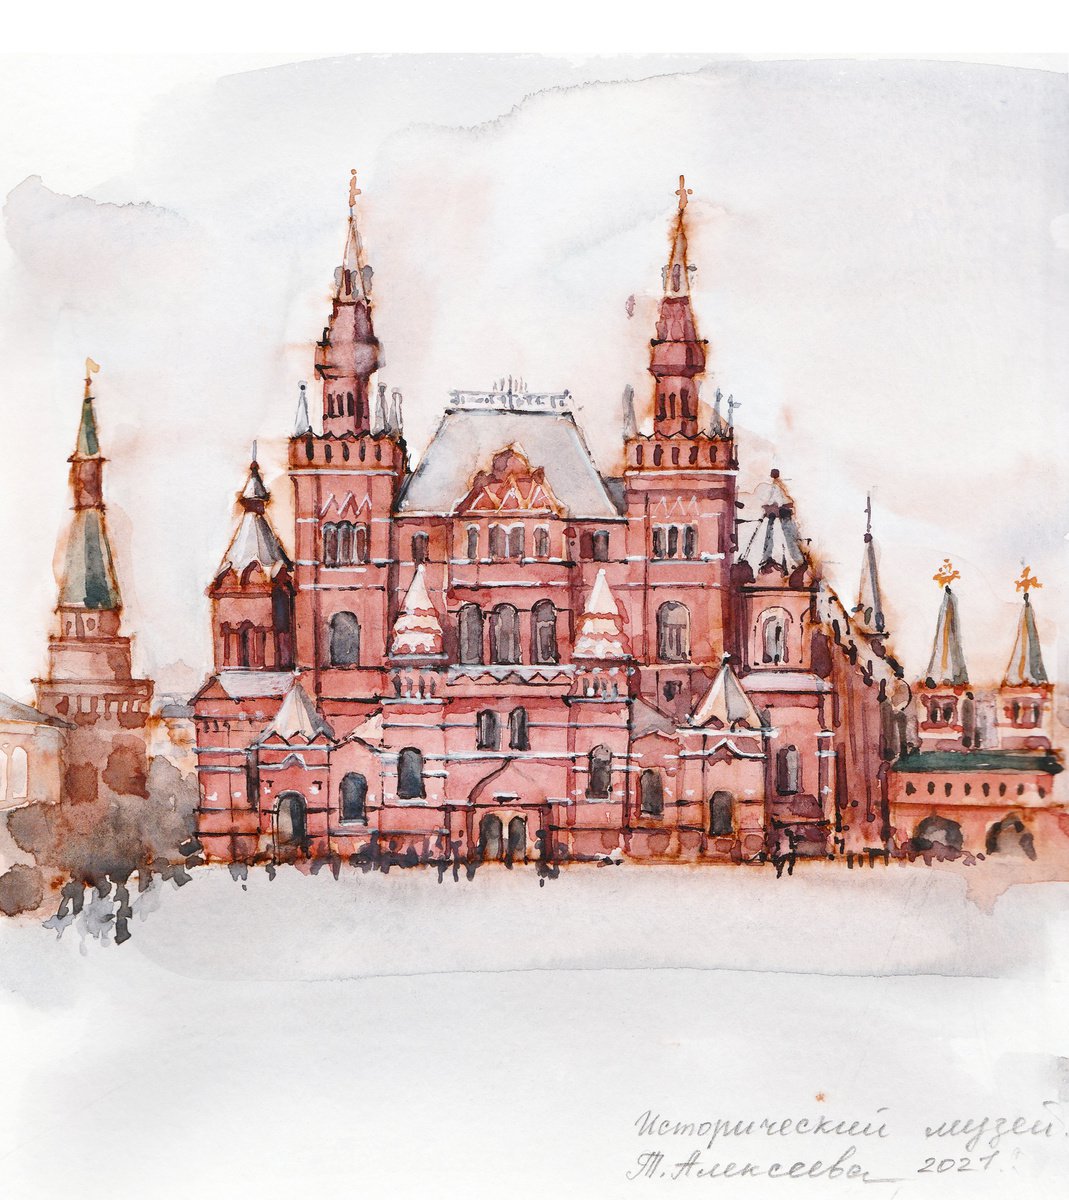 State Historical Museum of Russia by Tatiana Alekseeva